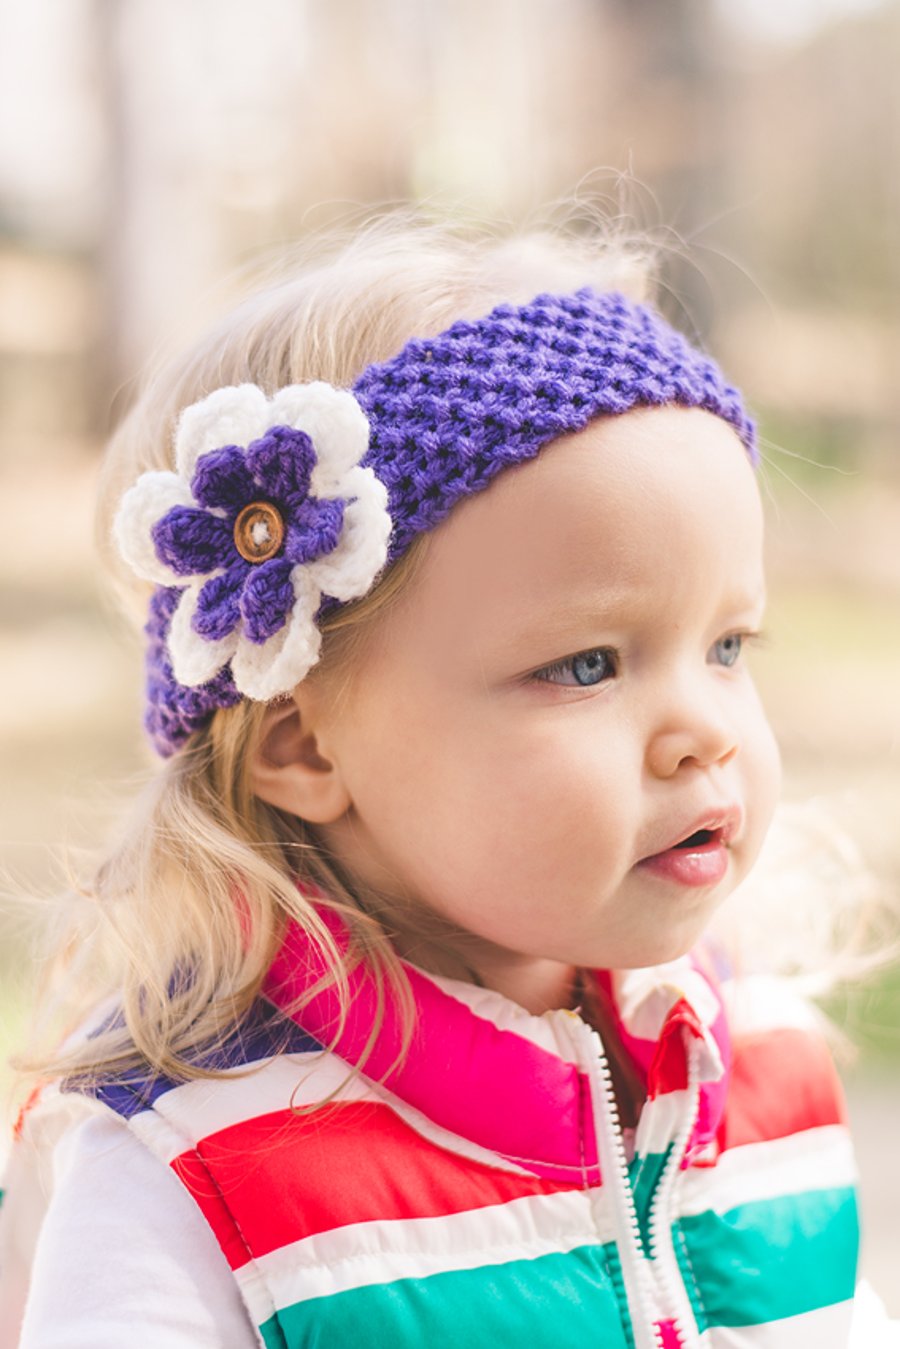 Girls Knitted Flower Headband, Made to order in any size, Other Colors